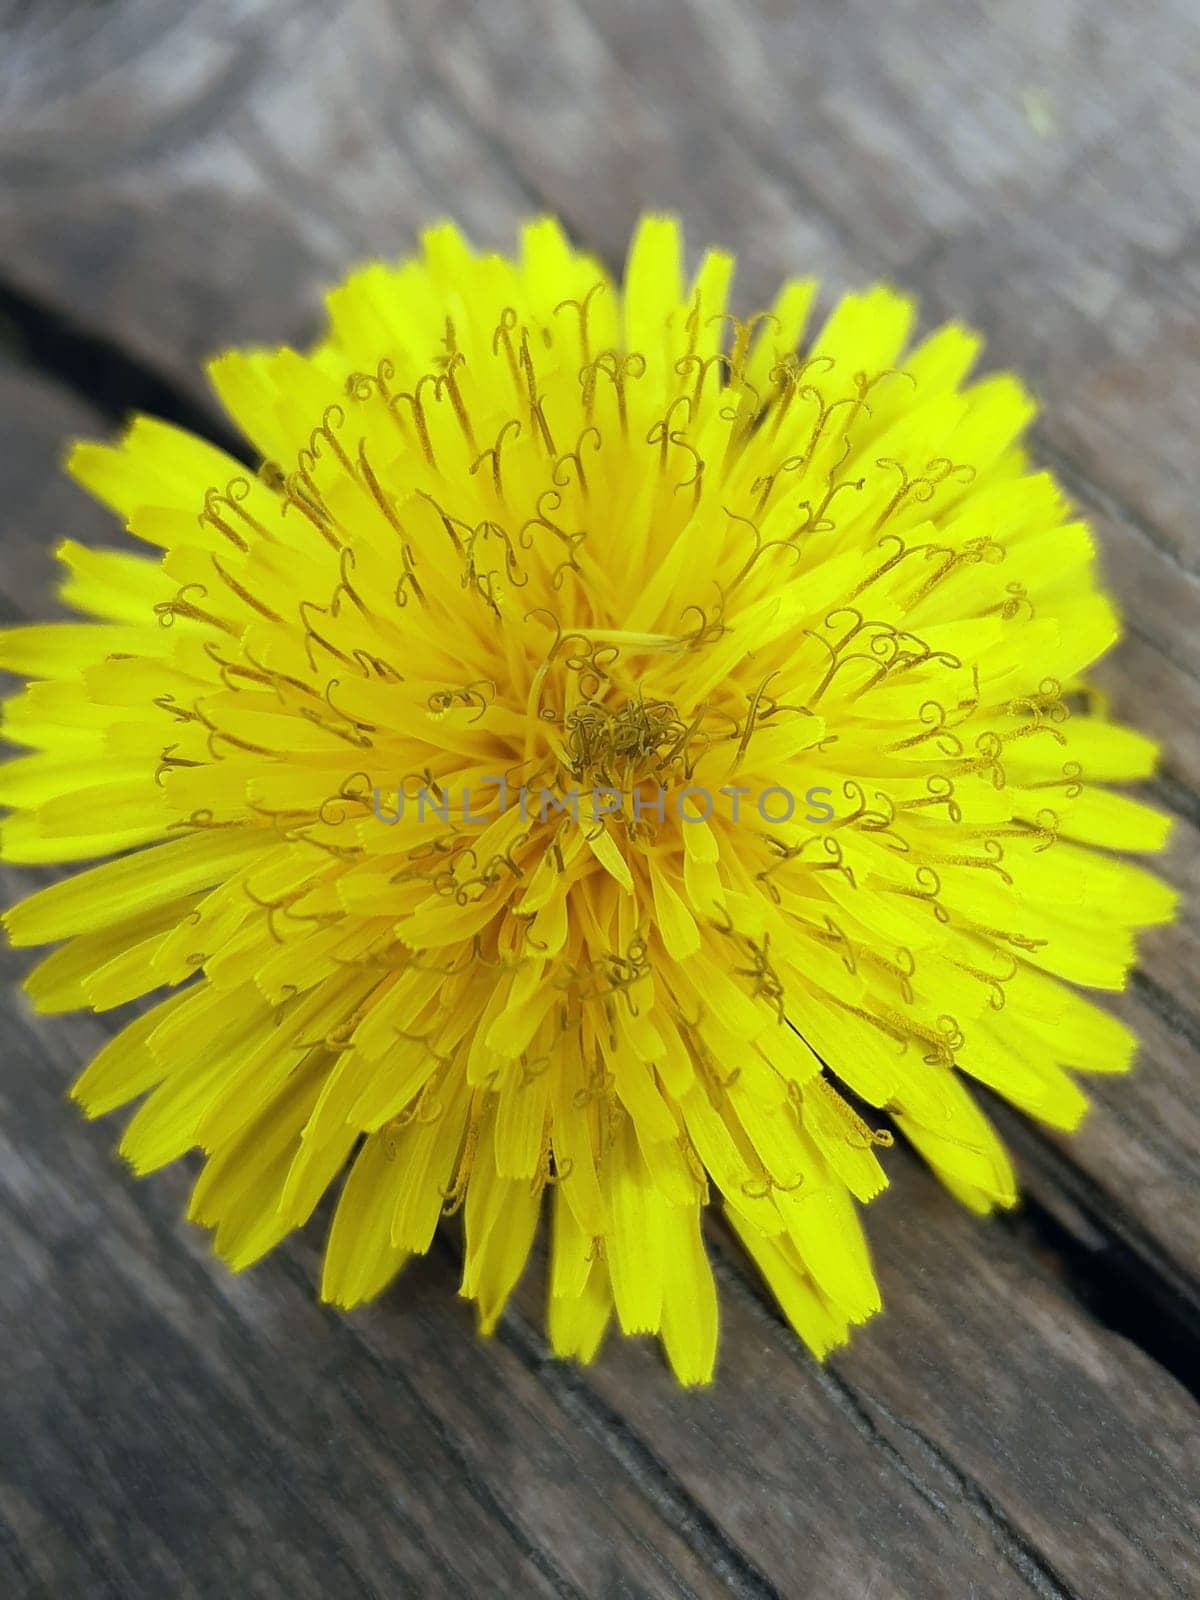 Dandelion flower on a wooden stump in early spring in the park close-up by Endusik